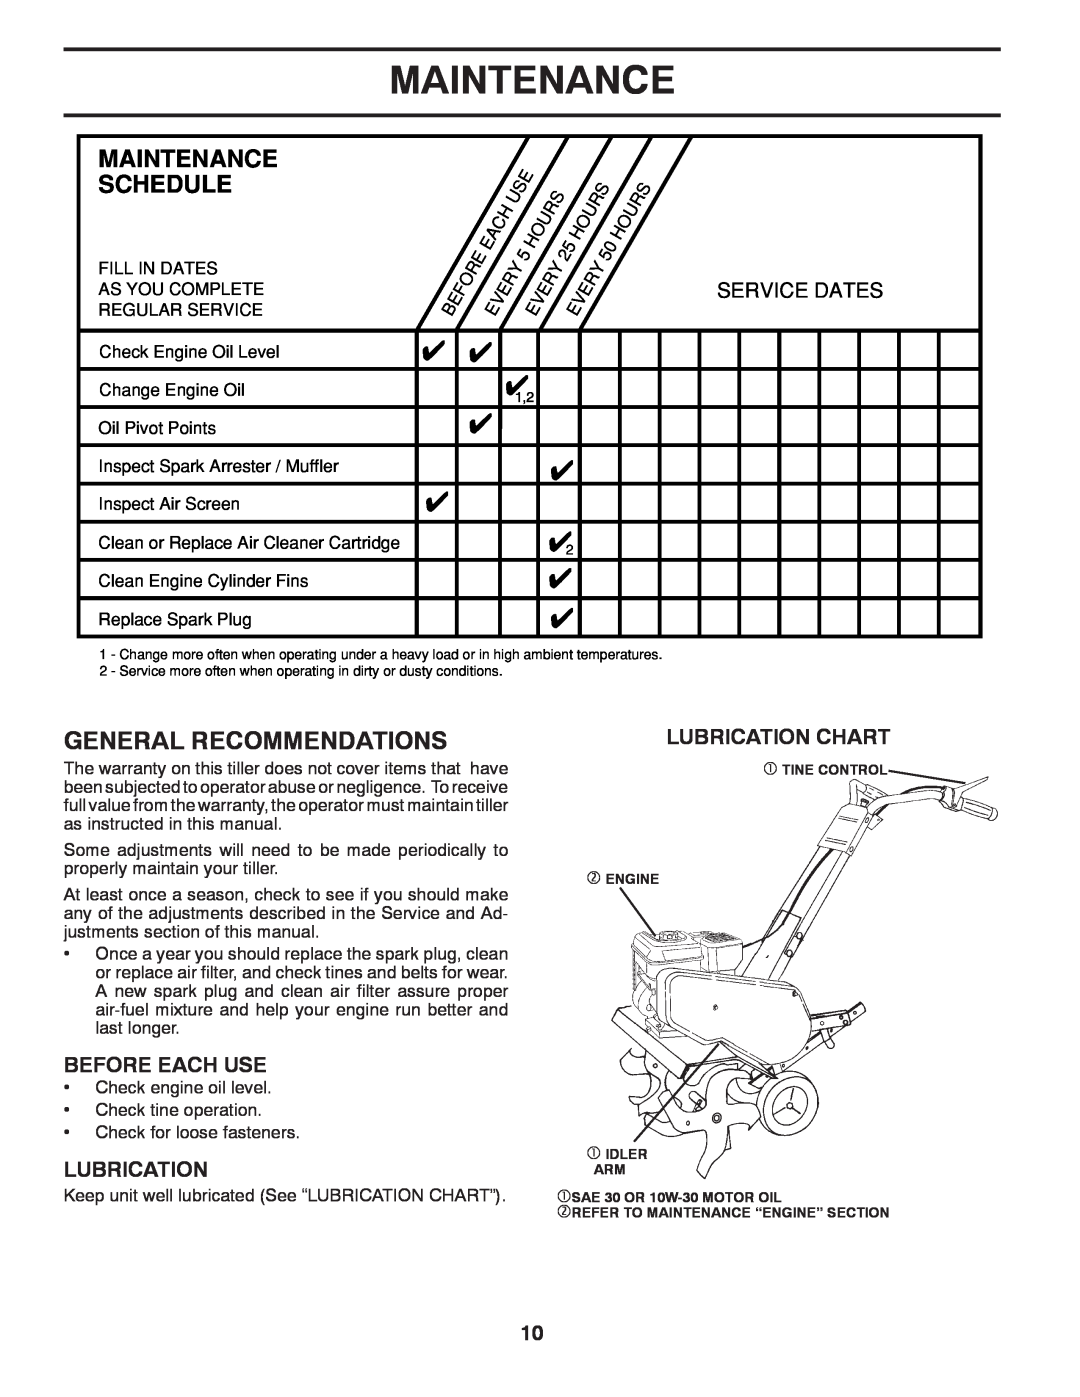 Poulan HDF825X General Recommendations, Before Each Use, Lubrication Chart, Maintenance Schedule, Service Dates 